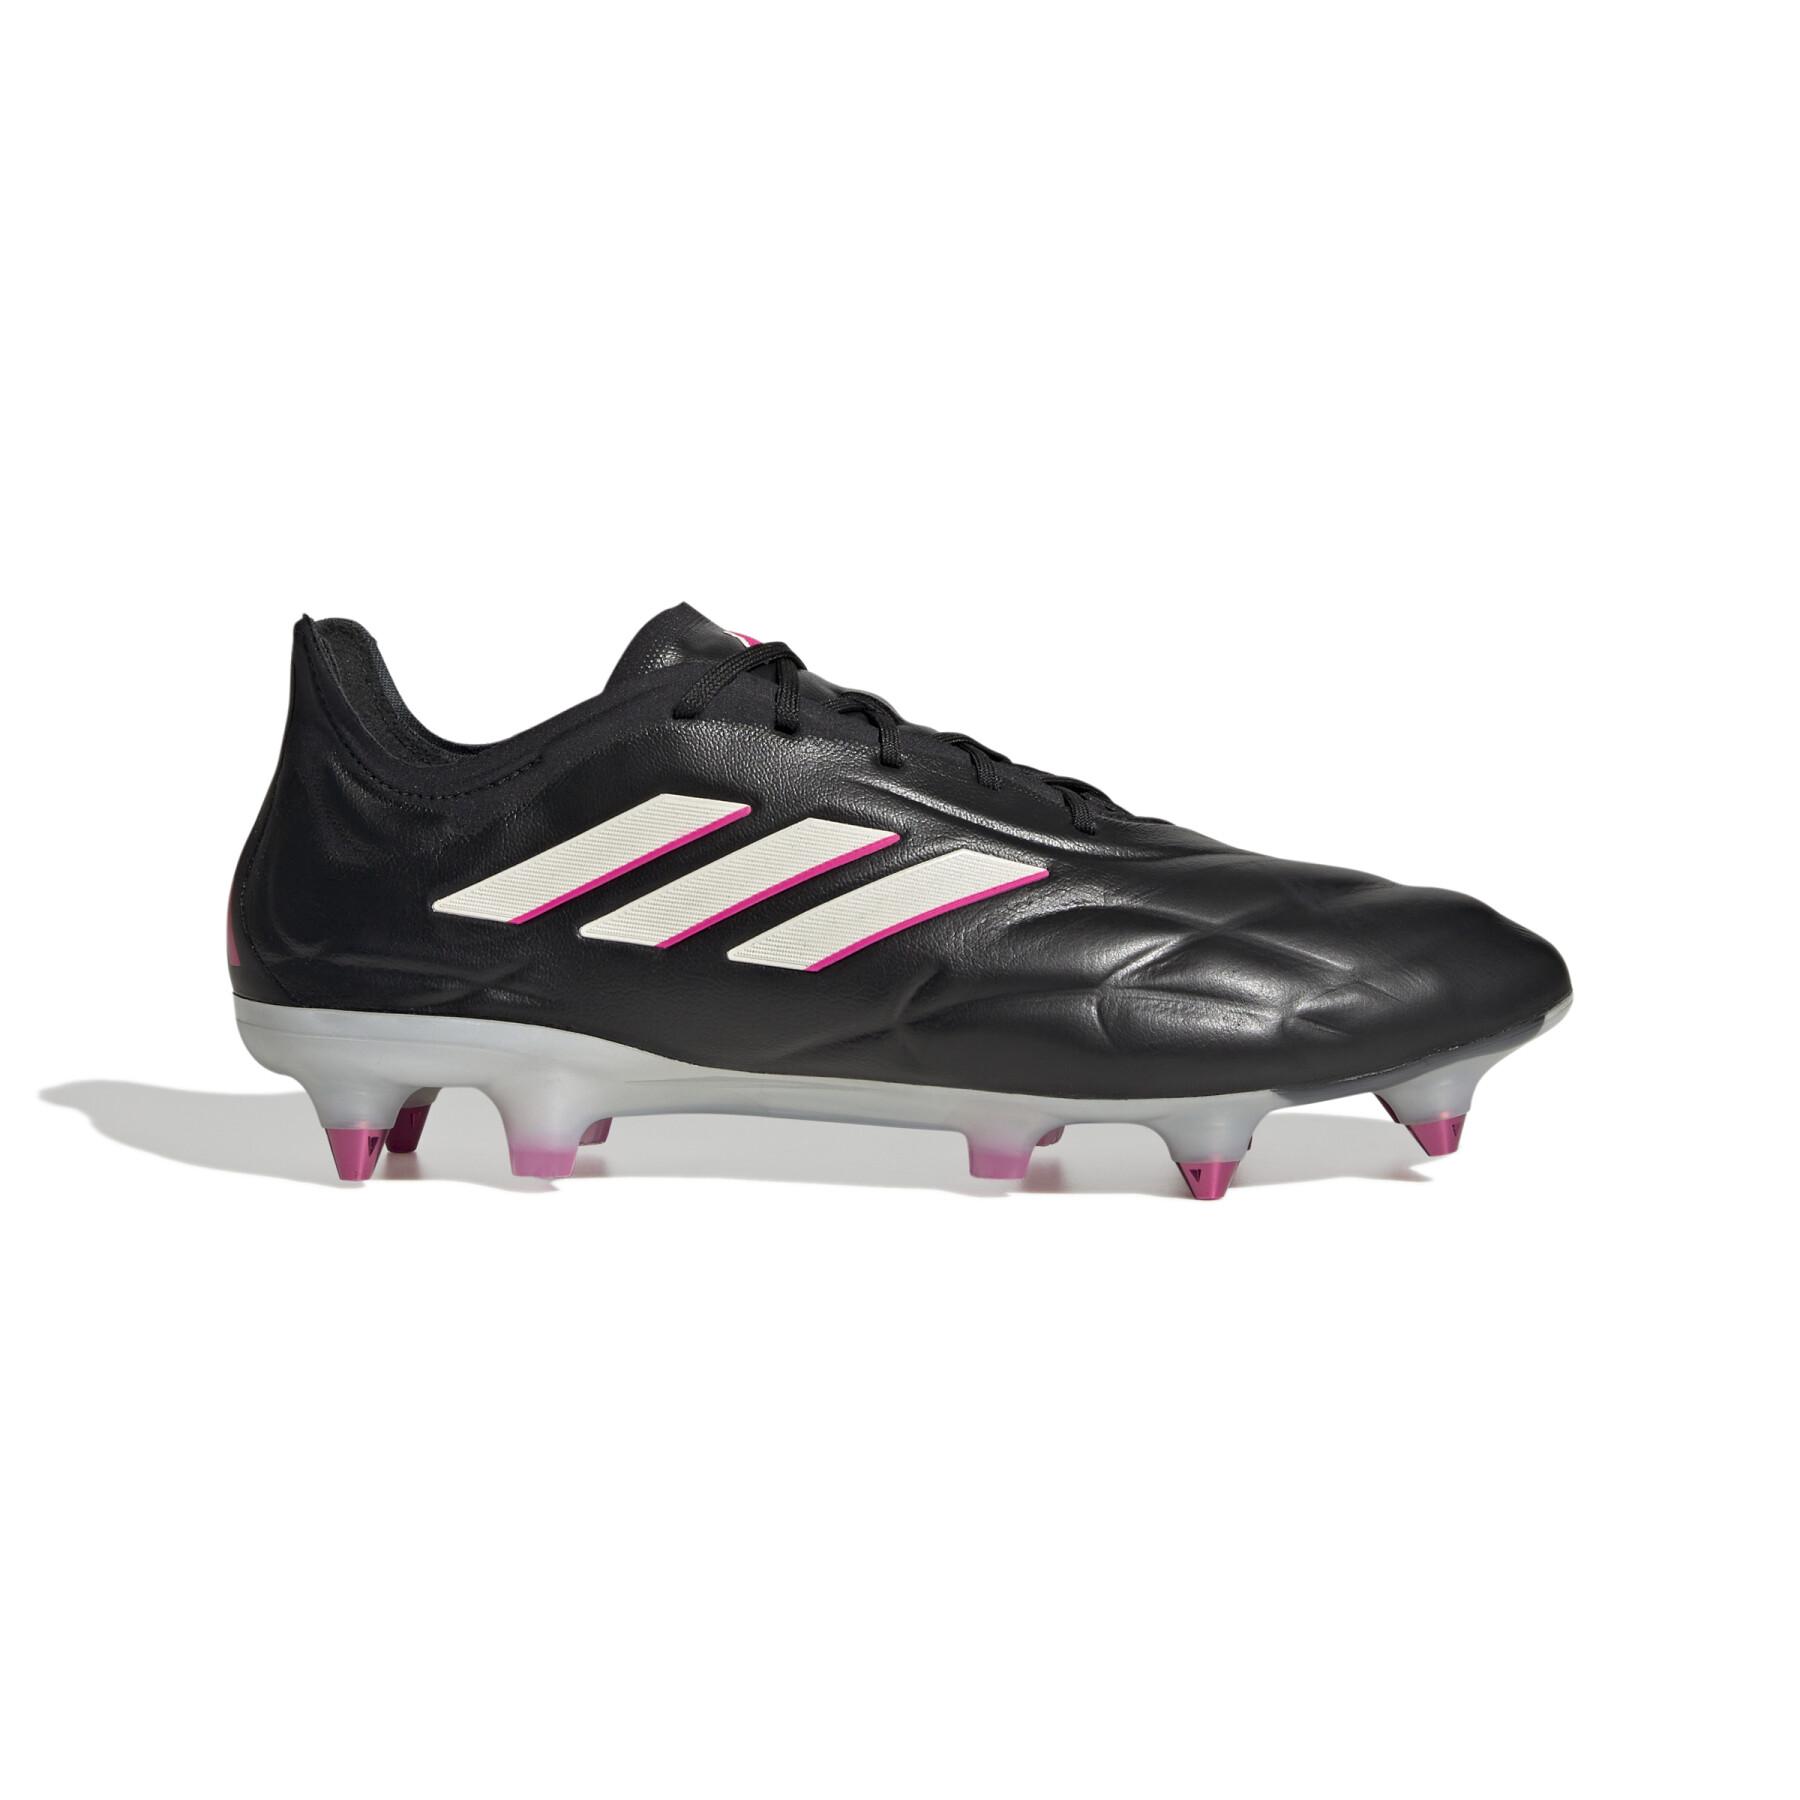 Children's soccer shoes adidas Copa Pure.1 SG